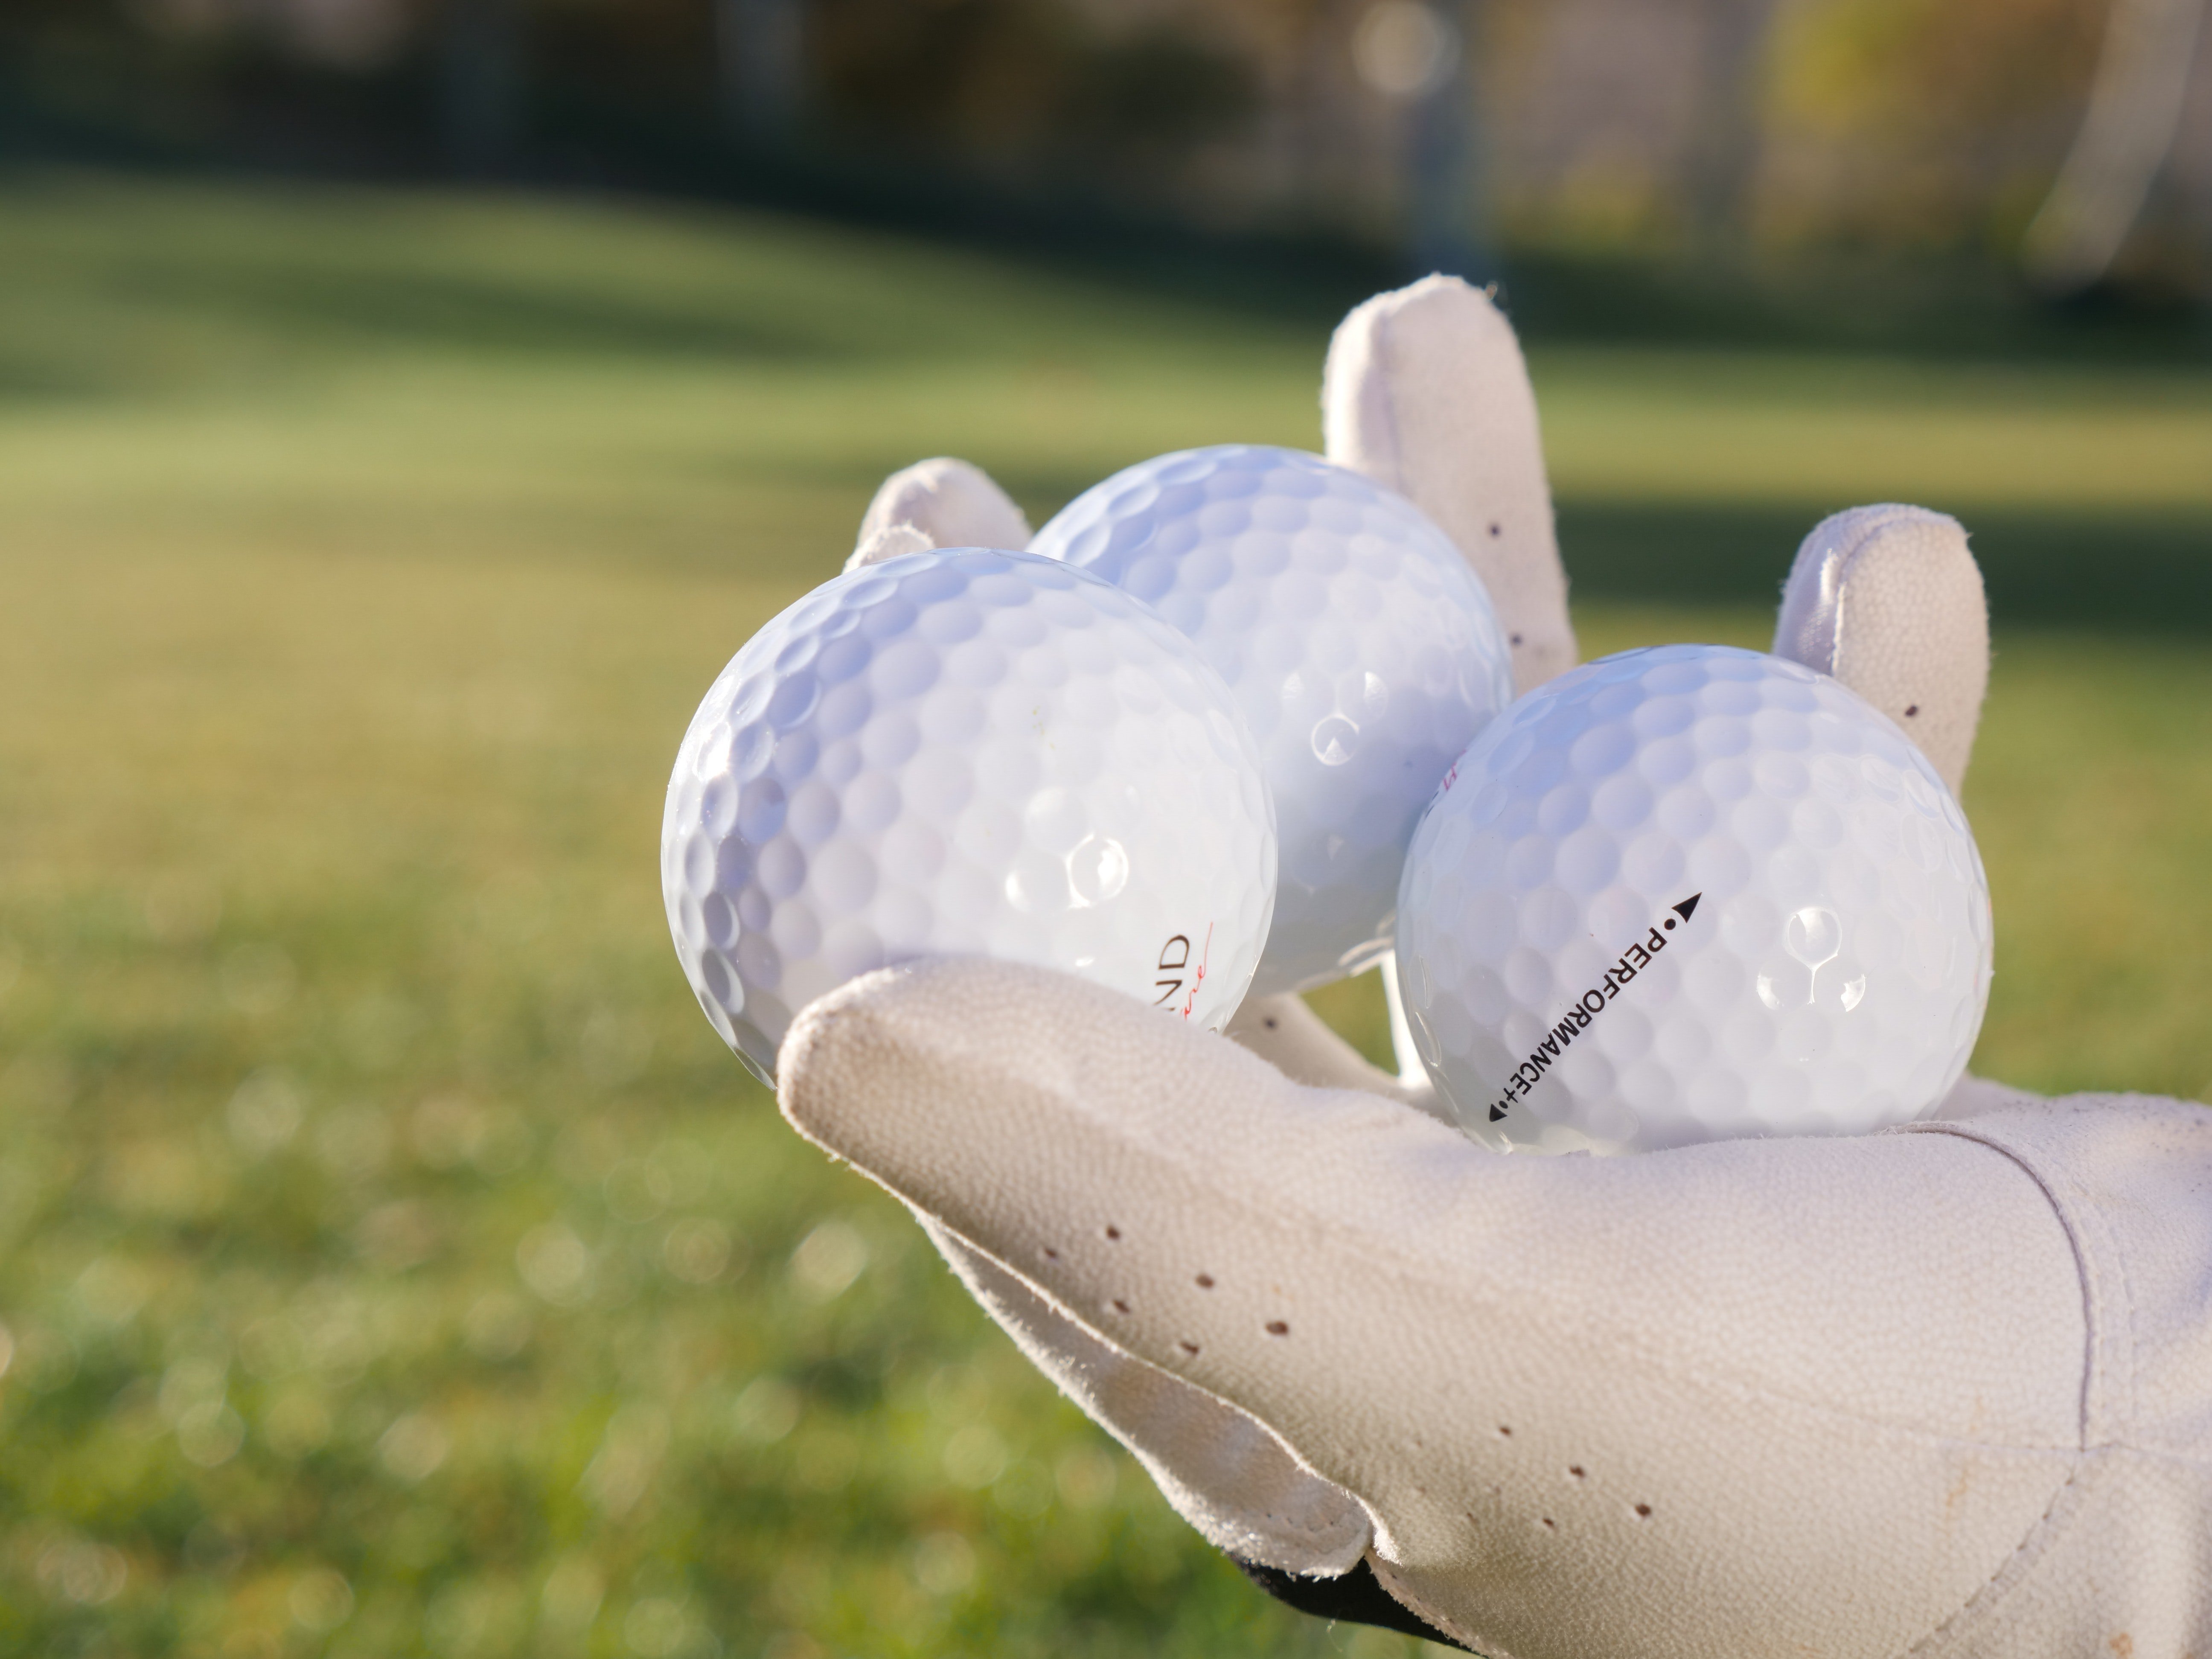 The man forgot his bag at home and didn't know what to do with the golf balls.  |  Photo: Pexels